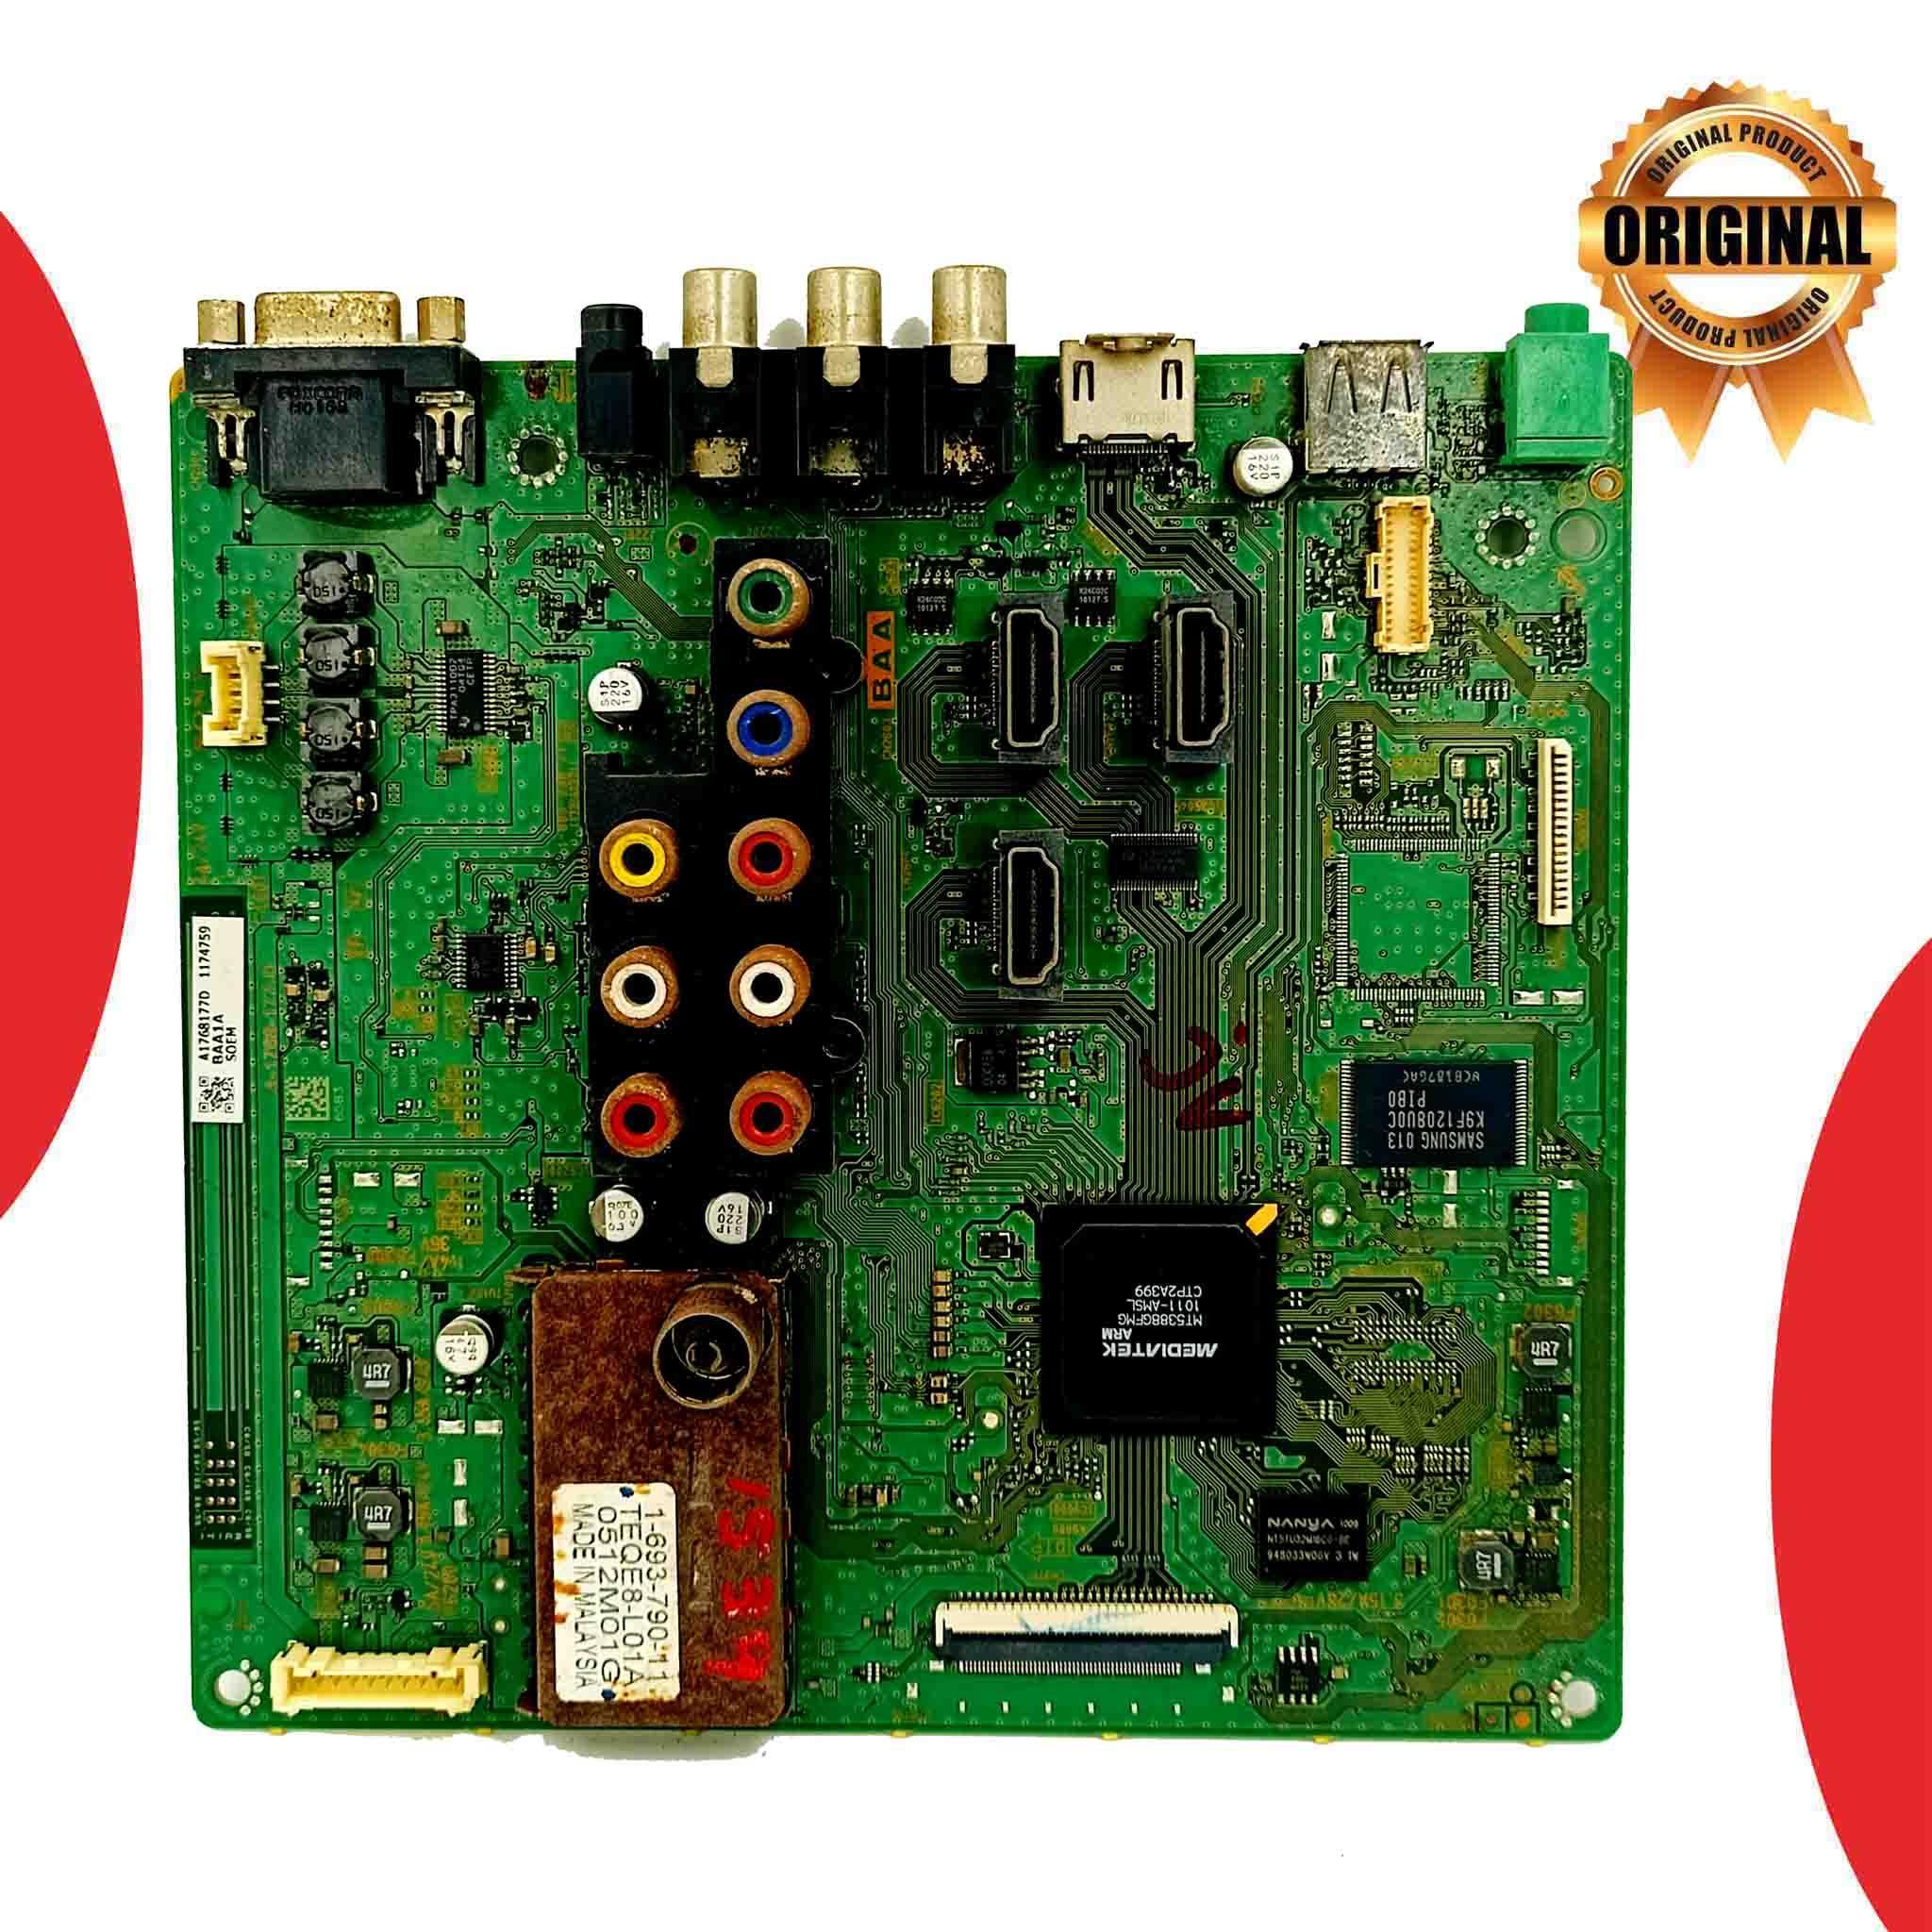 Model 32EX300 Sony LED TV Motherboard at Attractive Price